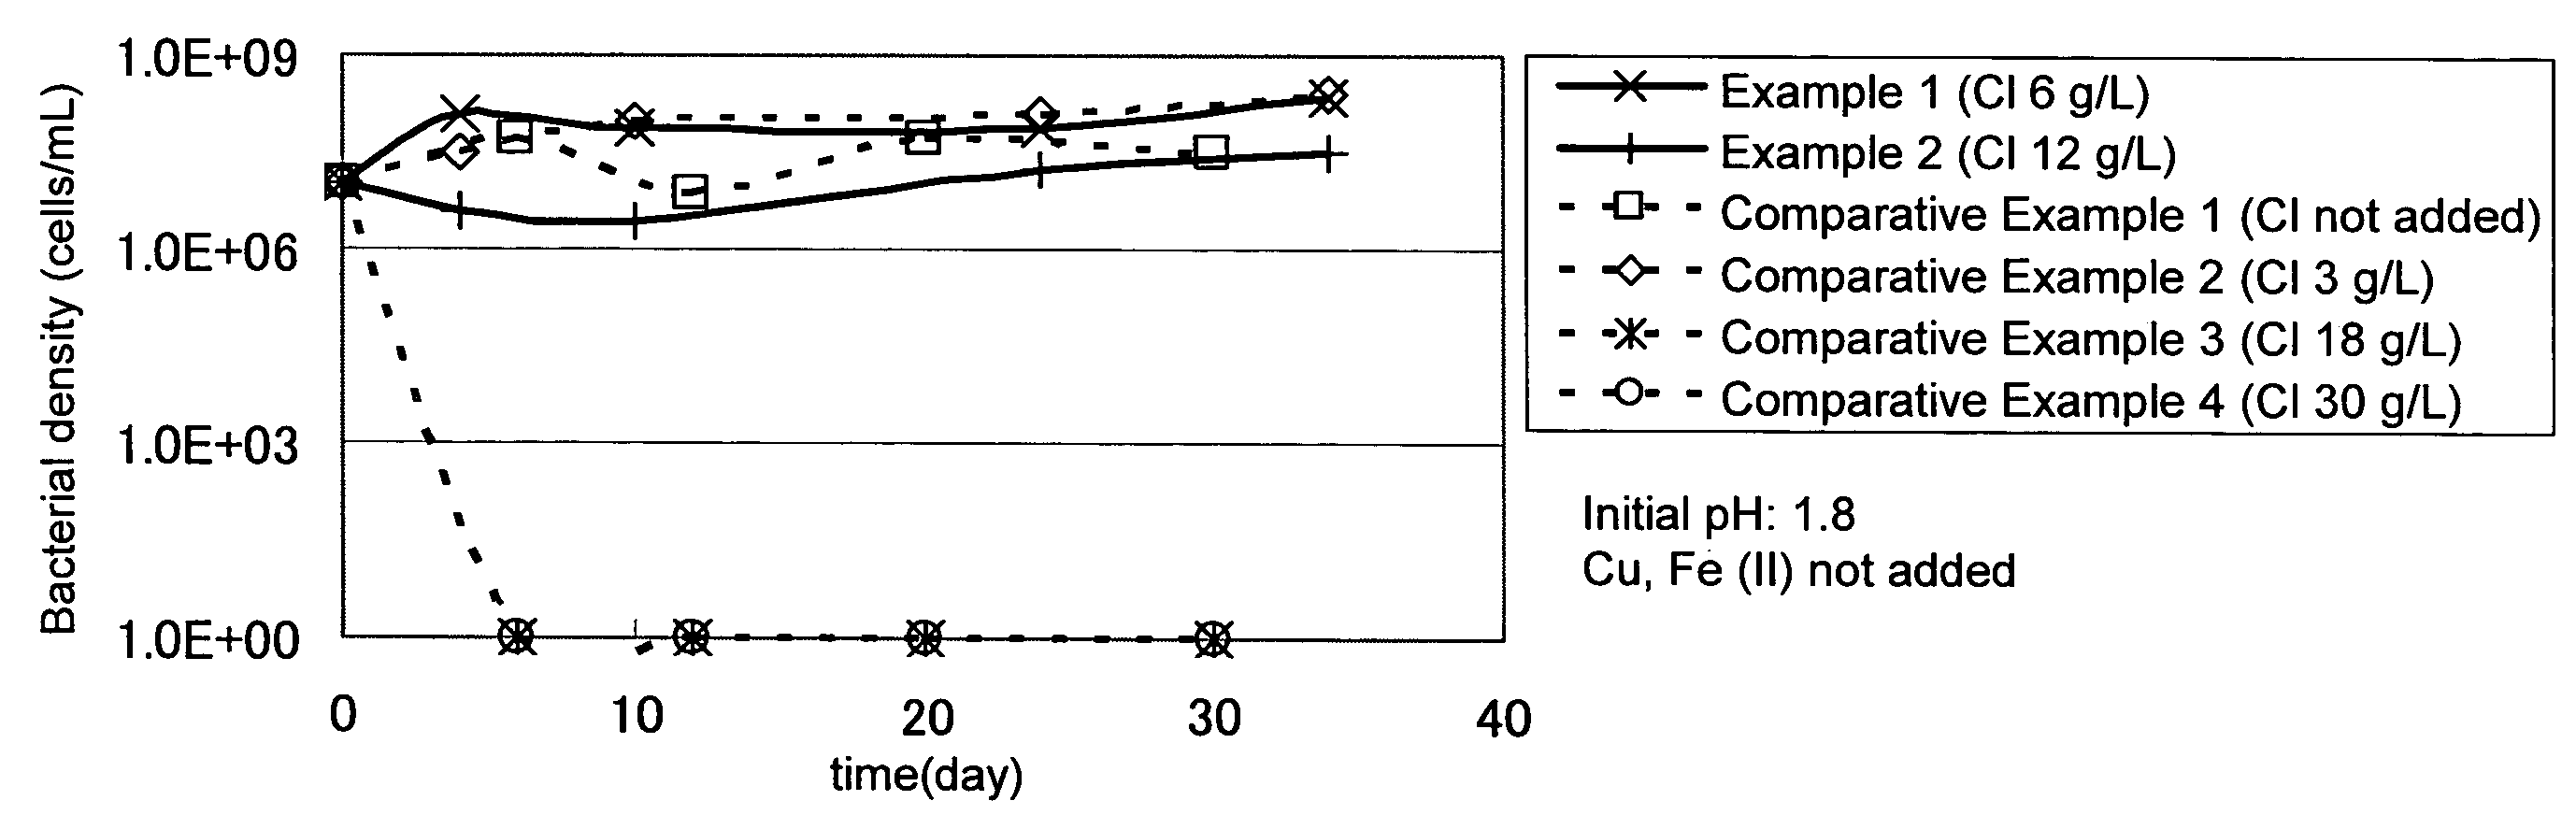 Method of leaching copper sulfide ores containing chalcopyrite